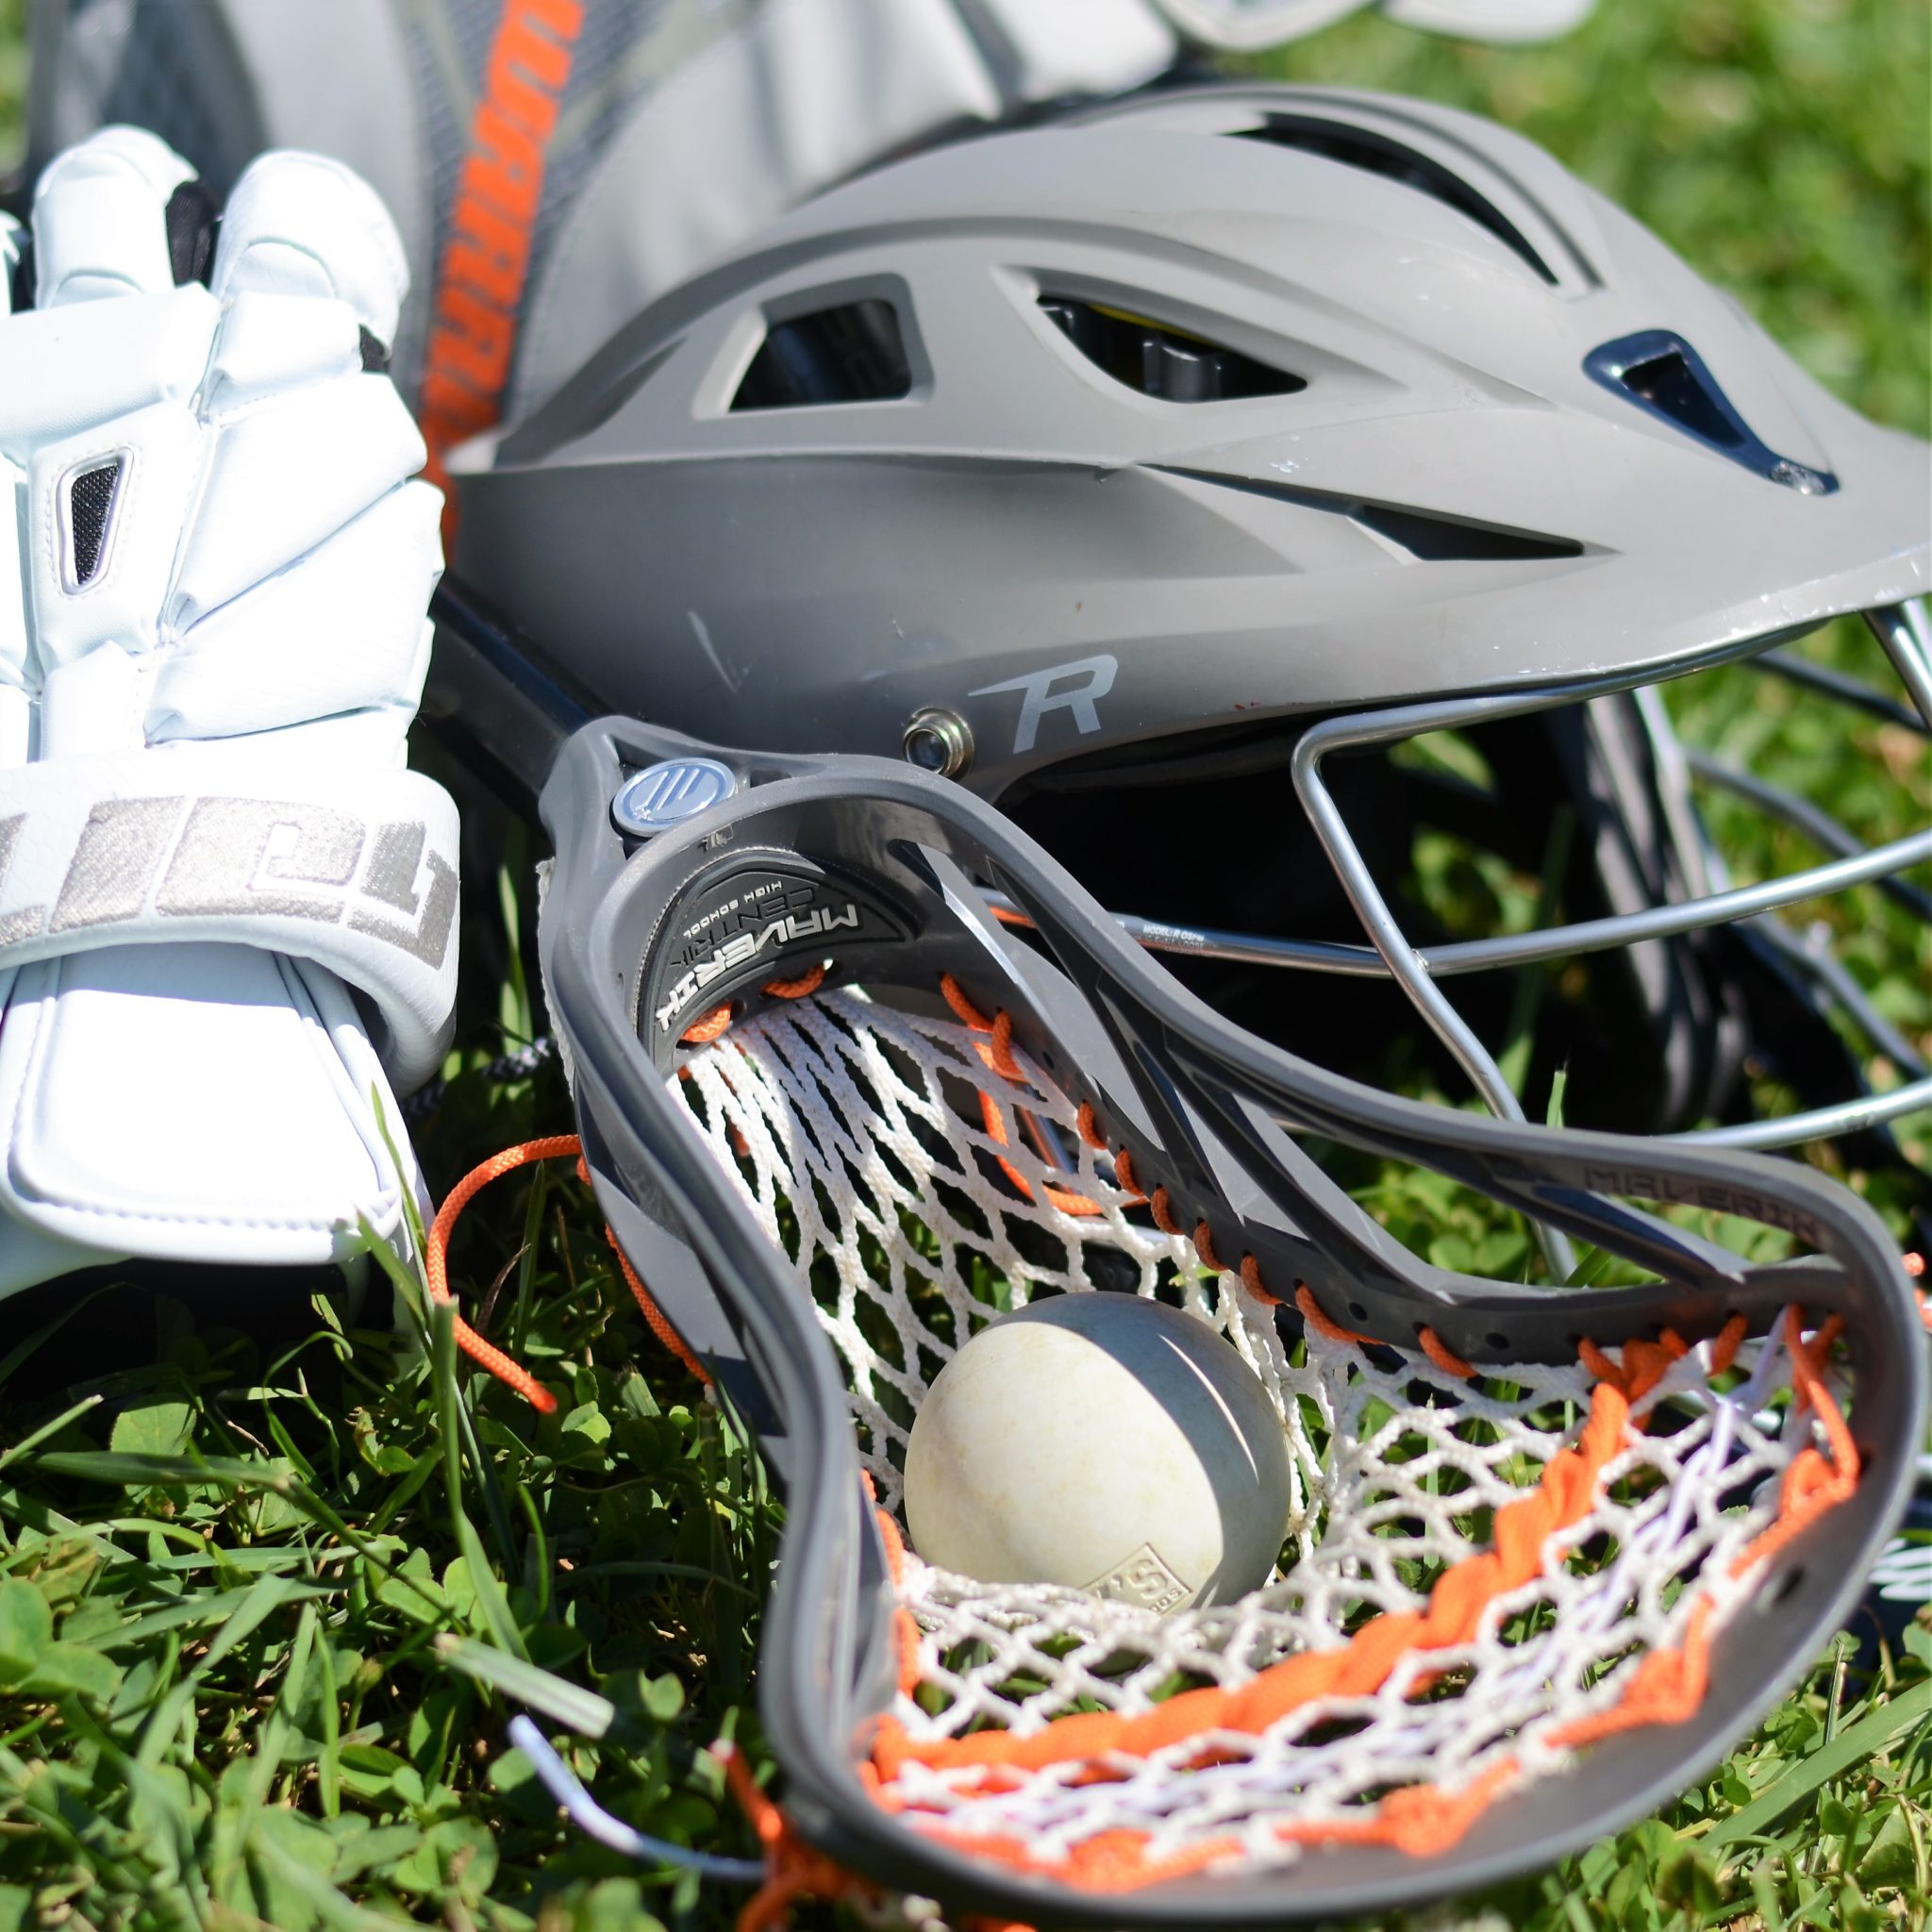 Required Equipment to Play Lacrosse